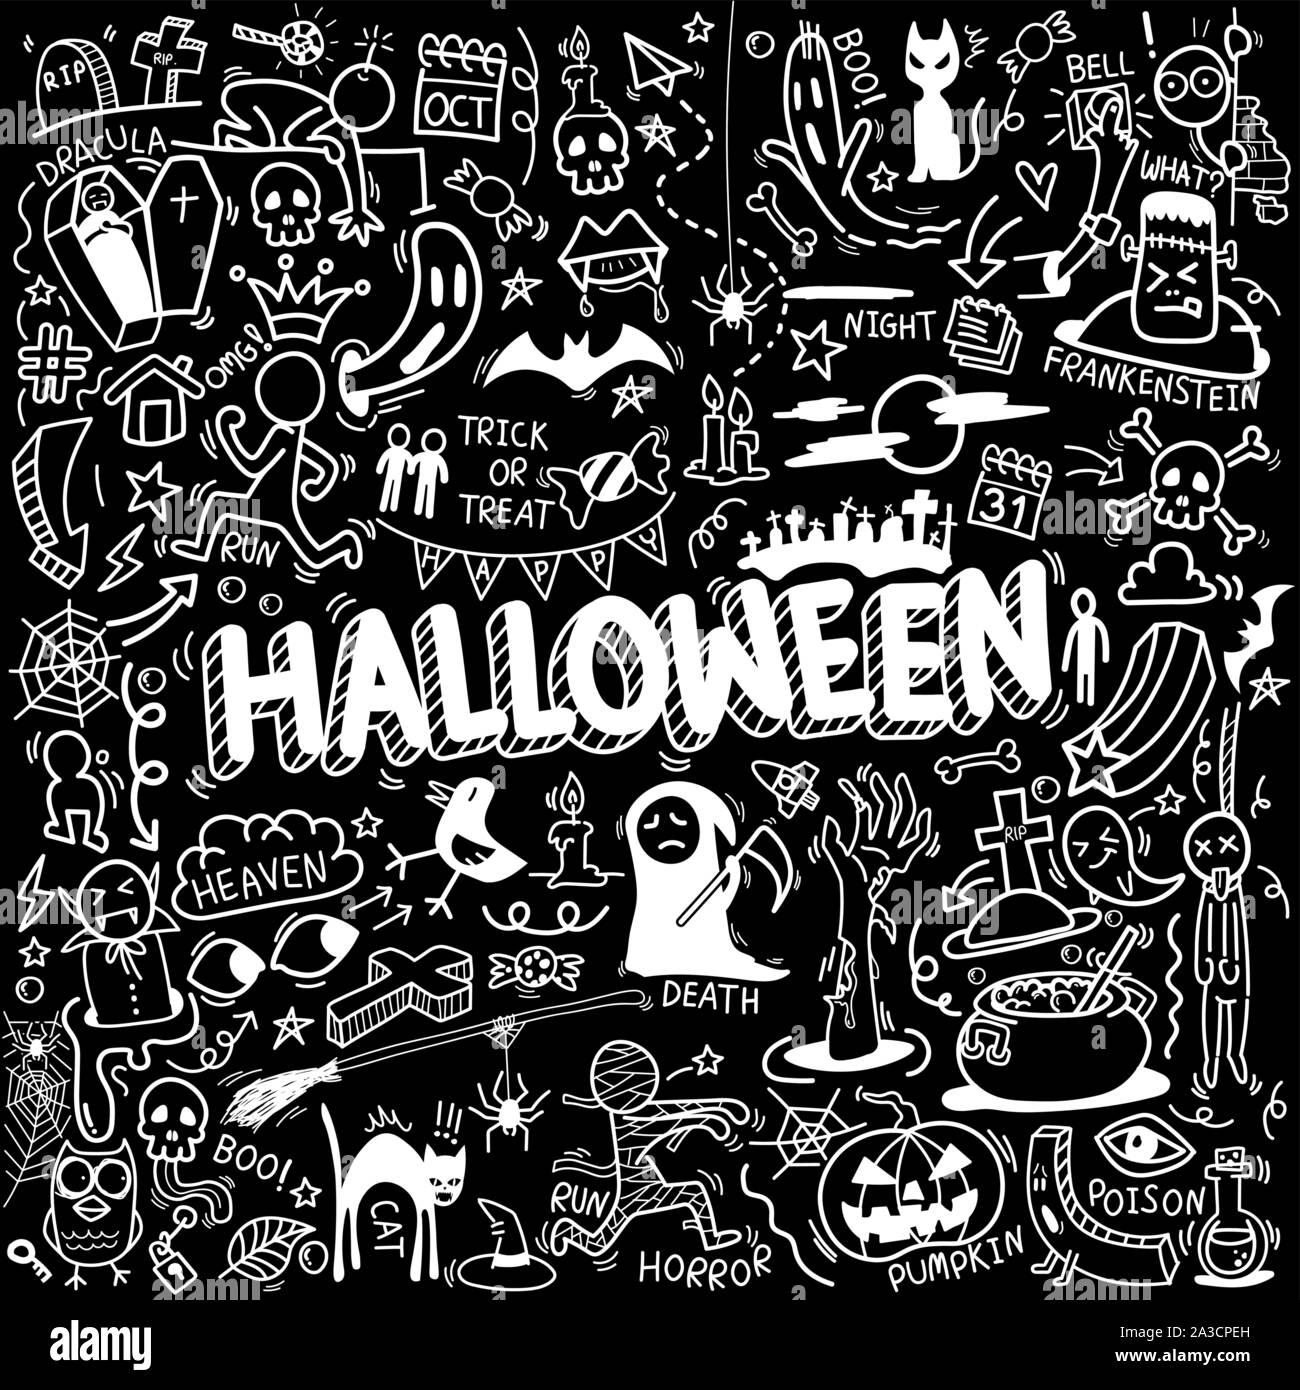 vector of hand drawn doodle cartoon set of objects and symbols on the Halloween theme Stock Vector